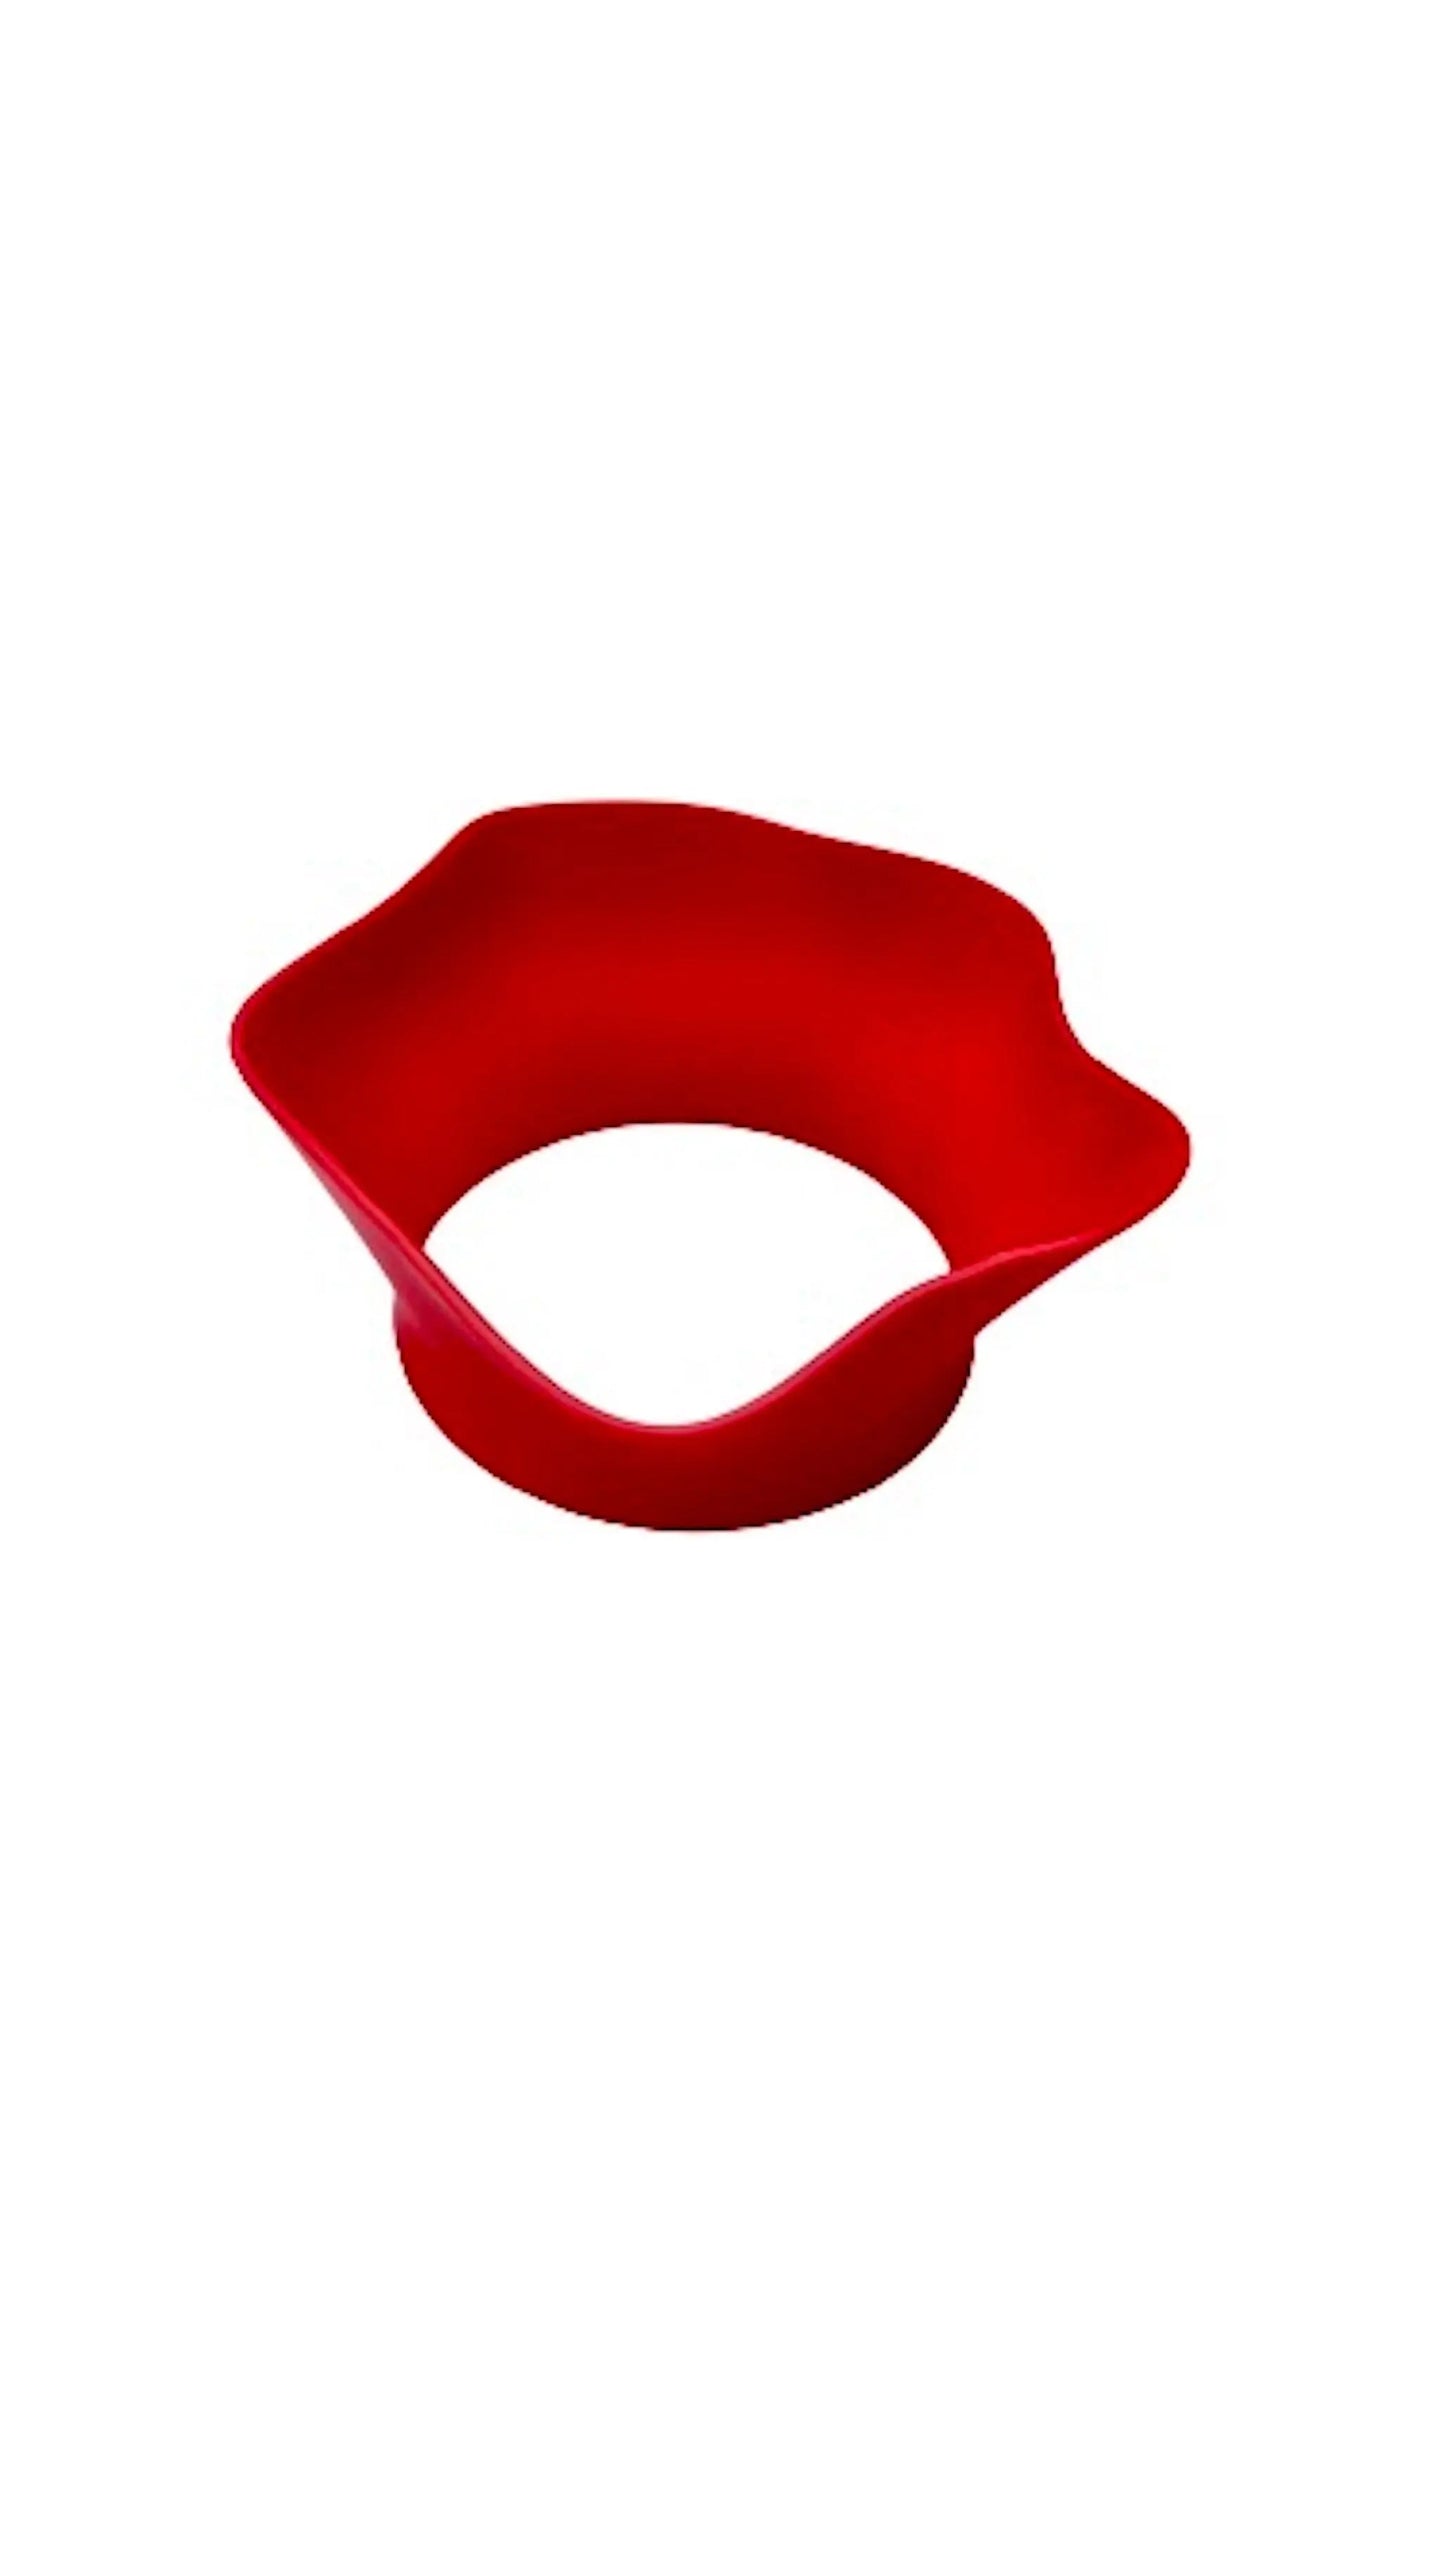 3D Printed Ruffle Cuff in Red LOVE HERO SUSTAINABLE FASHION